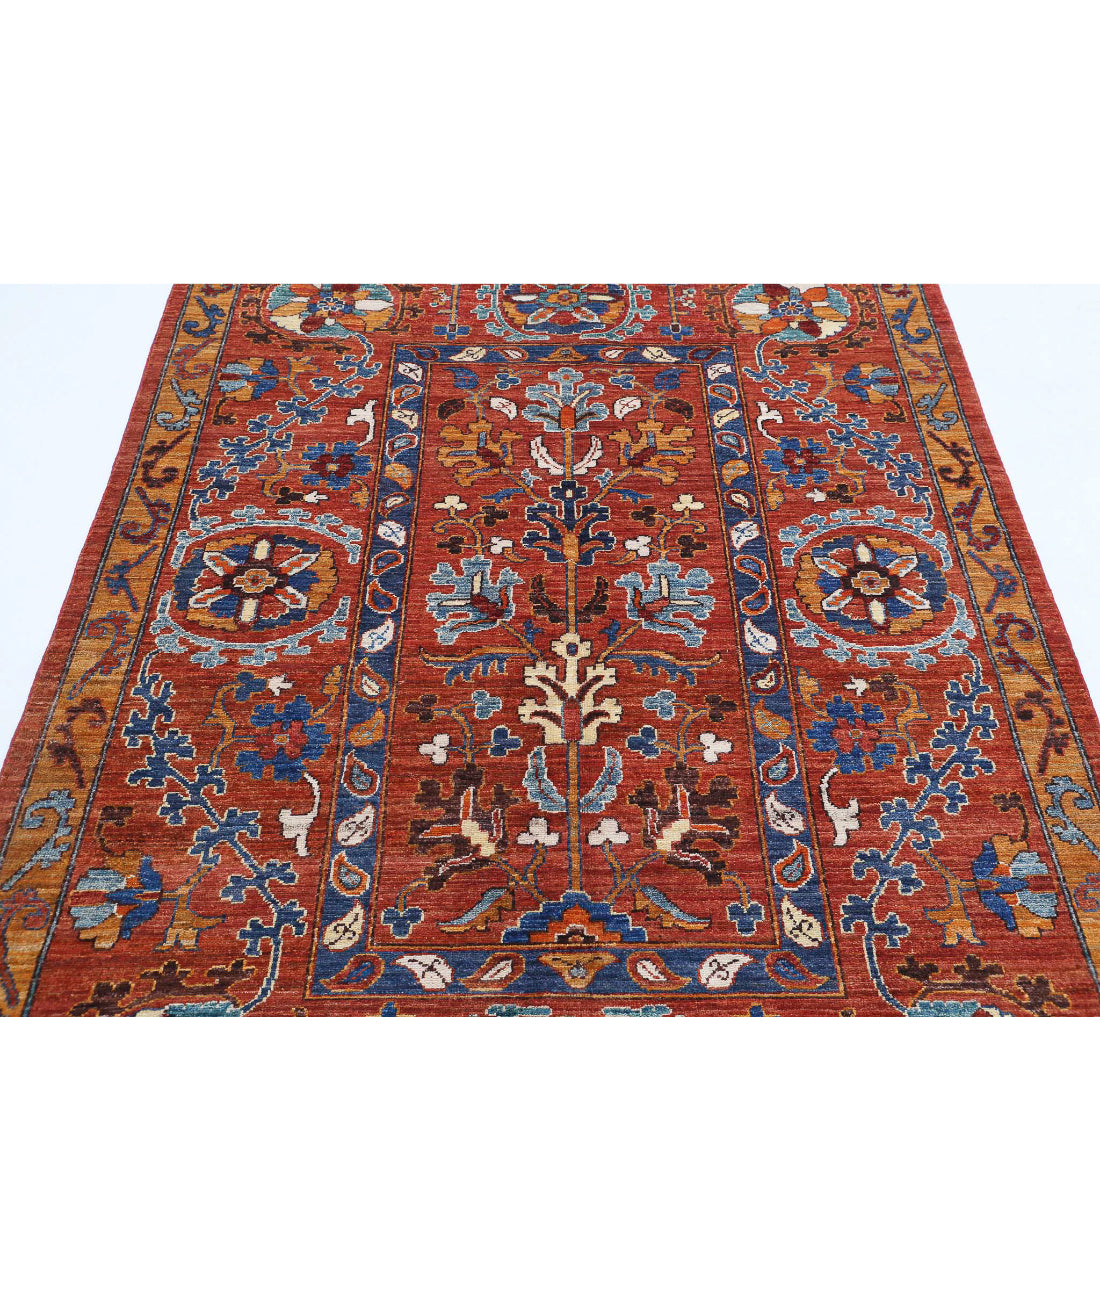 Humna 4'10'' X 6'5'' Hand-Knotted Wool Rug 4'10'' x 6'5'' (145 X 193) / Red / Rust